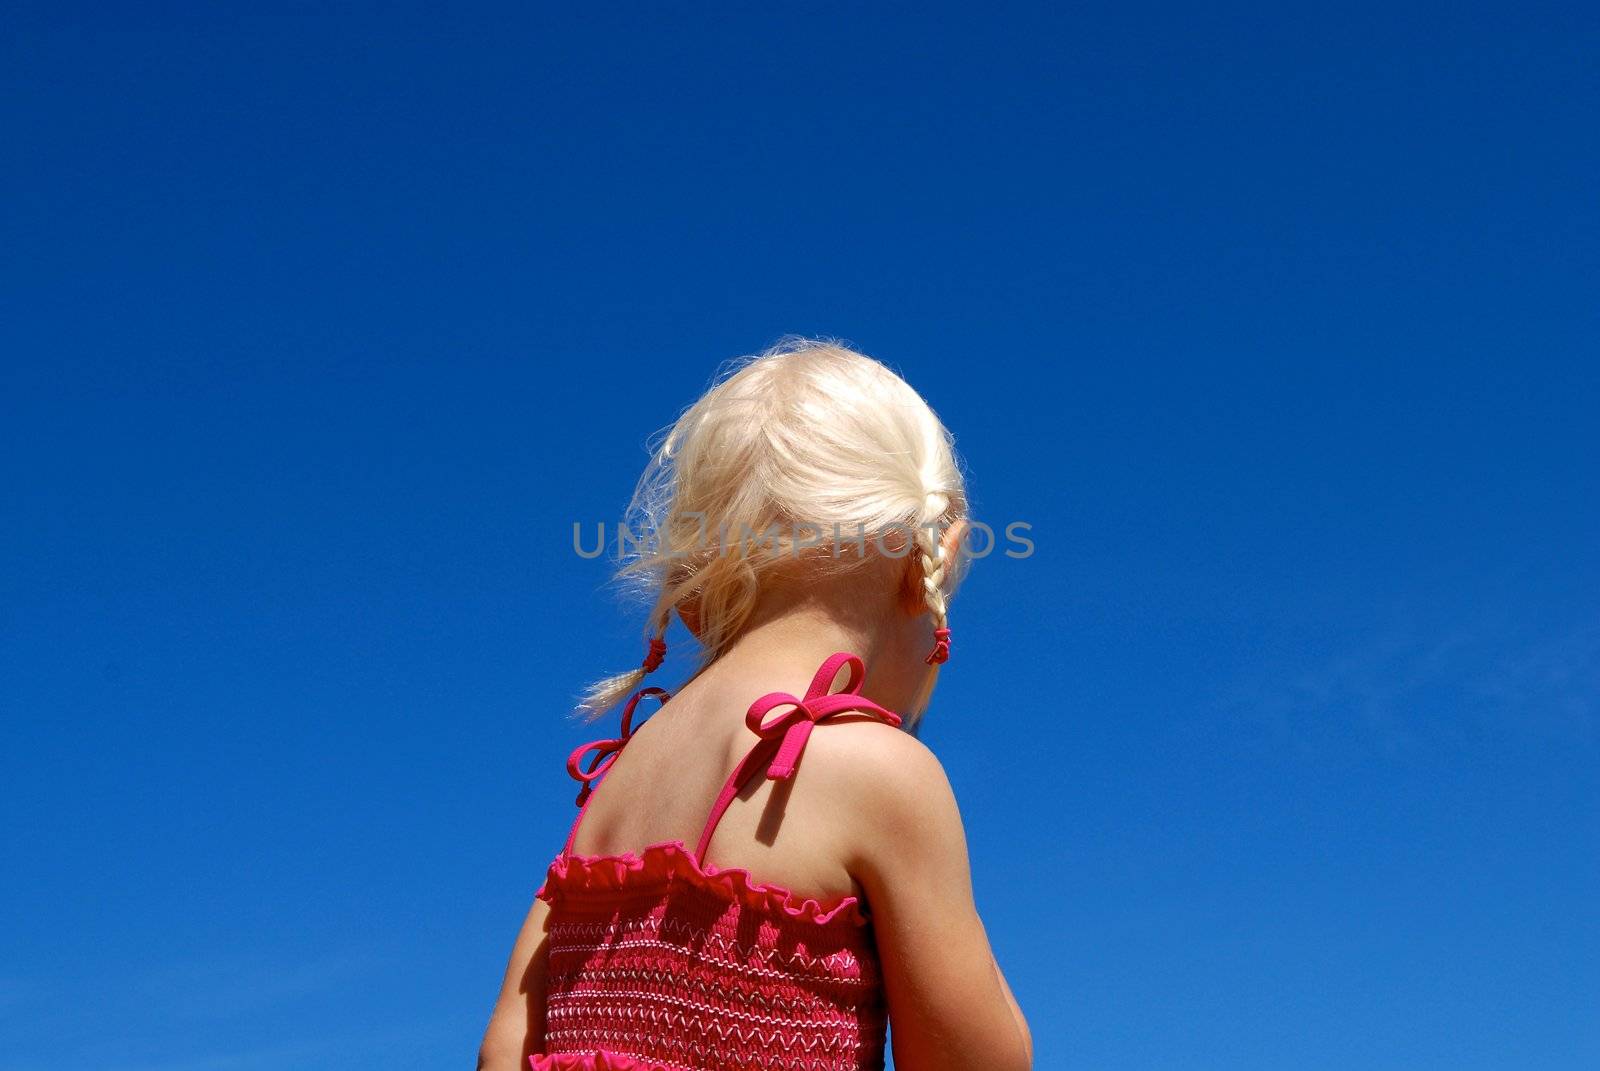 girl's back against blue sky. Please note: No negative use allowed.